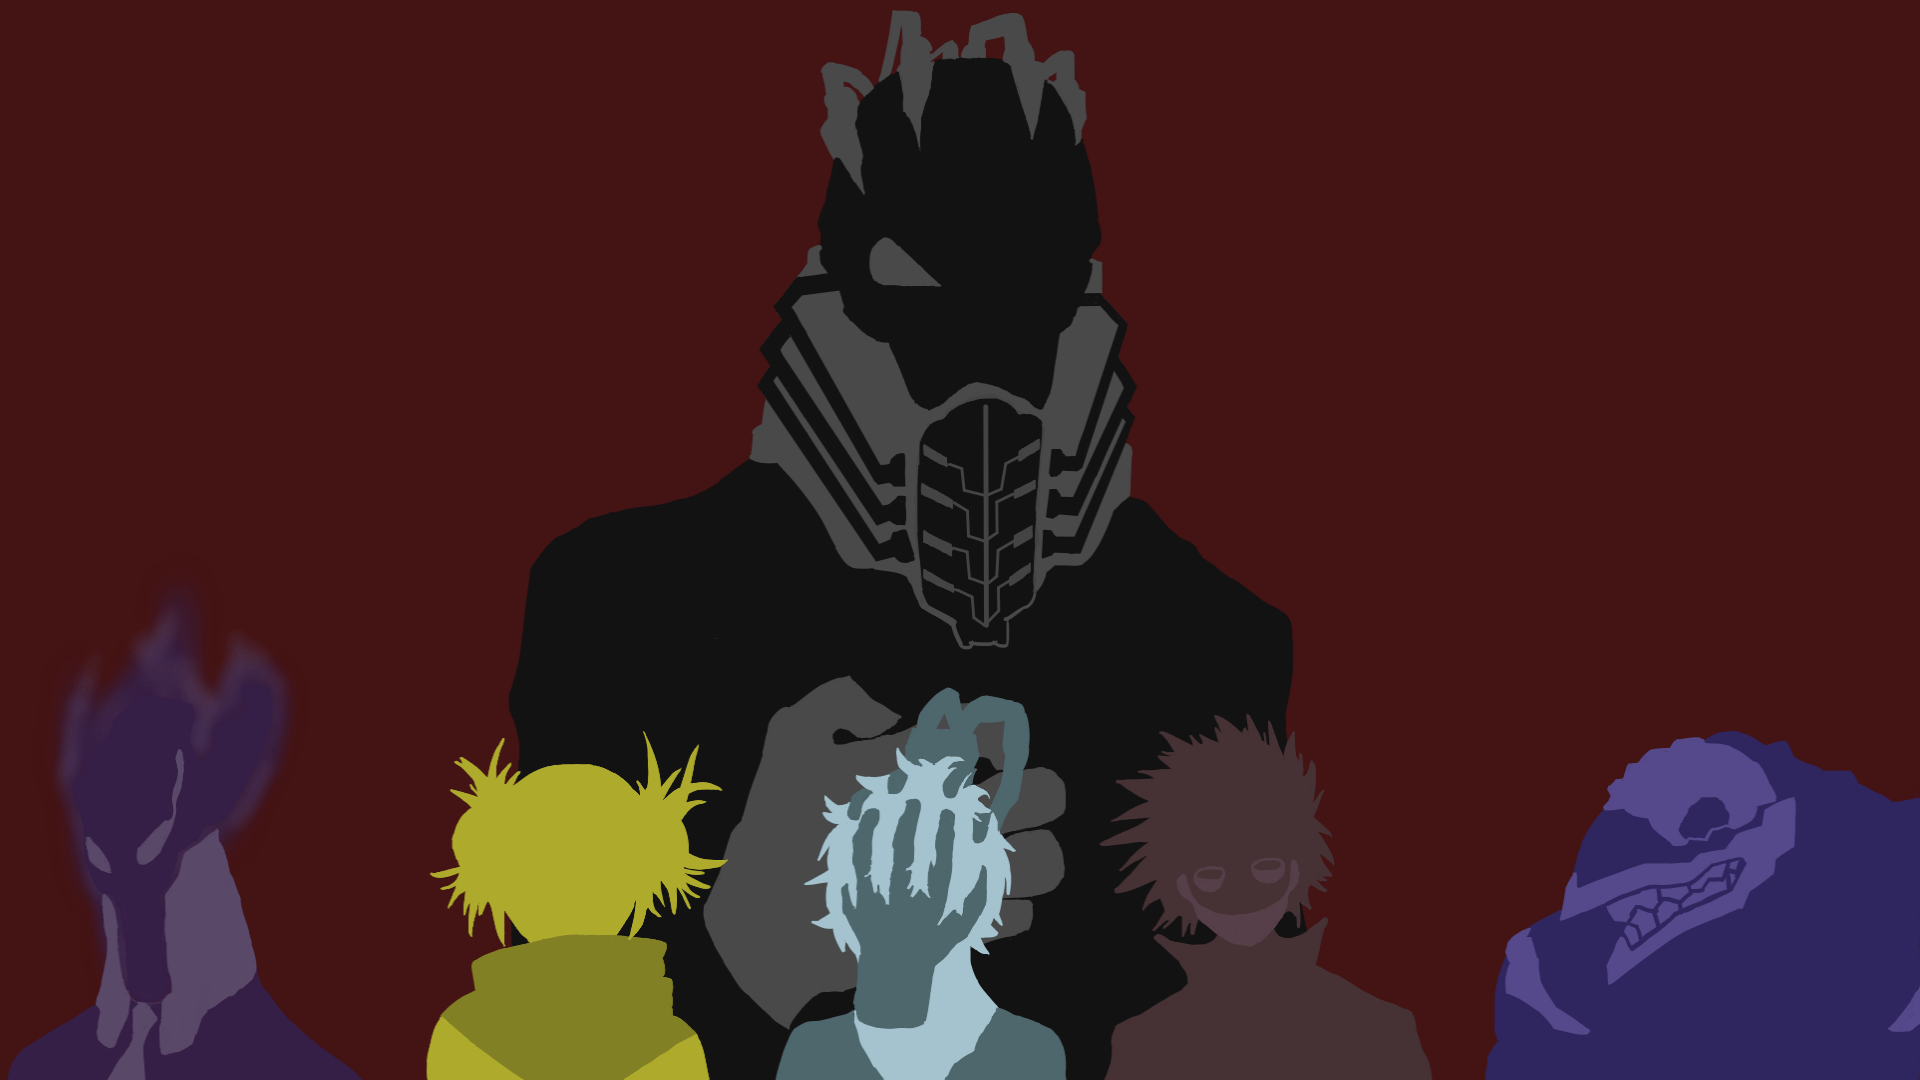 Second wallpaper made, now with villains!